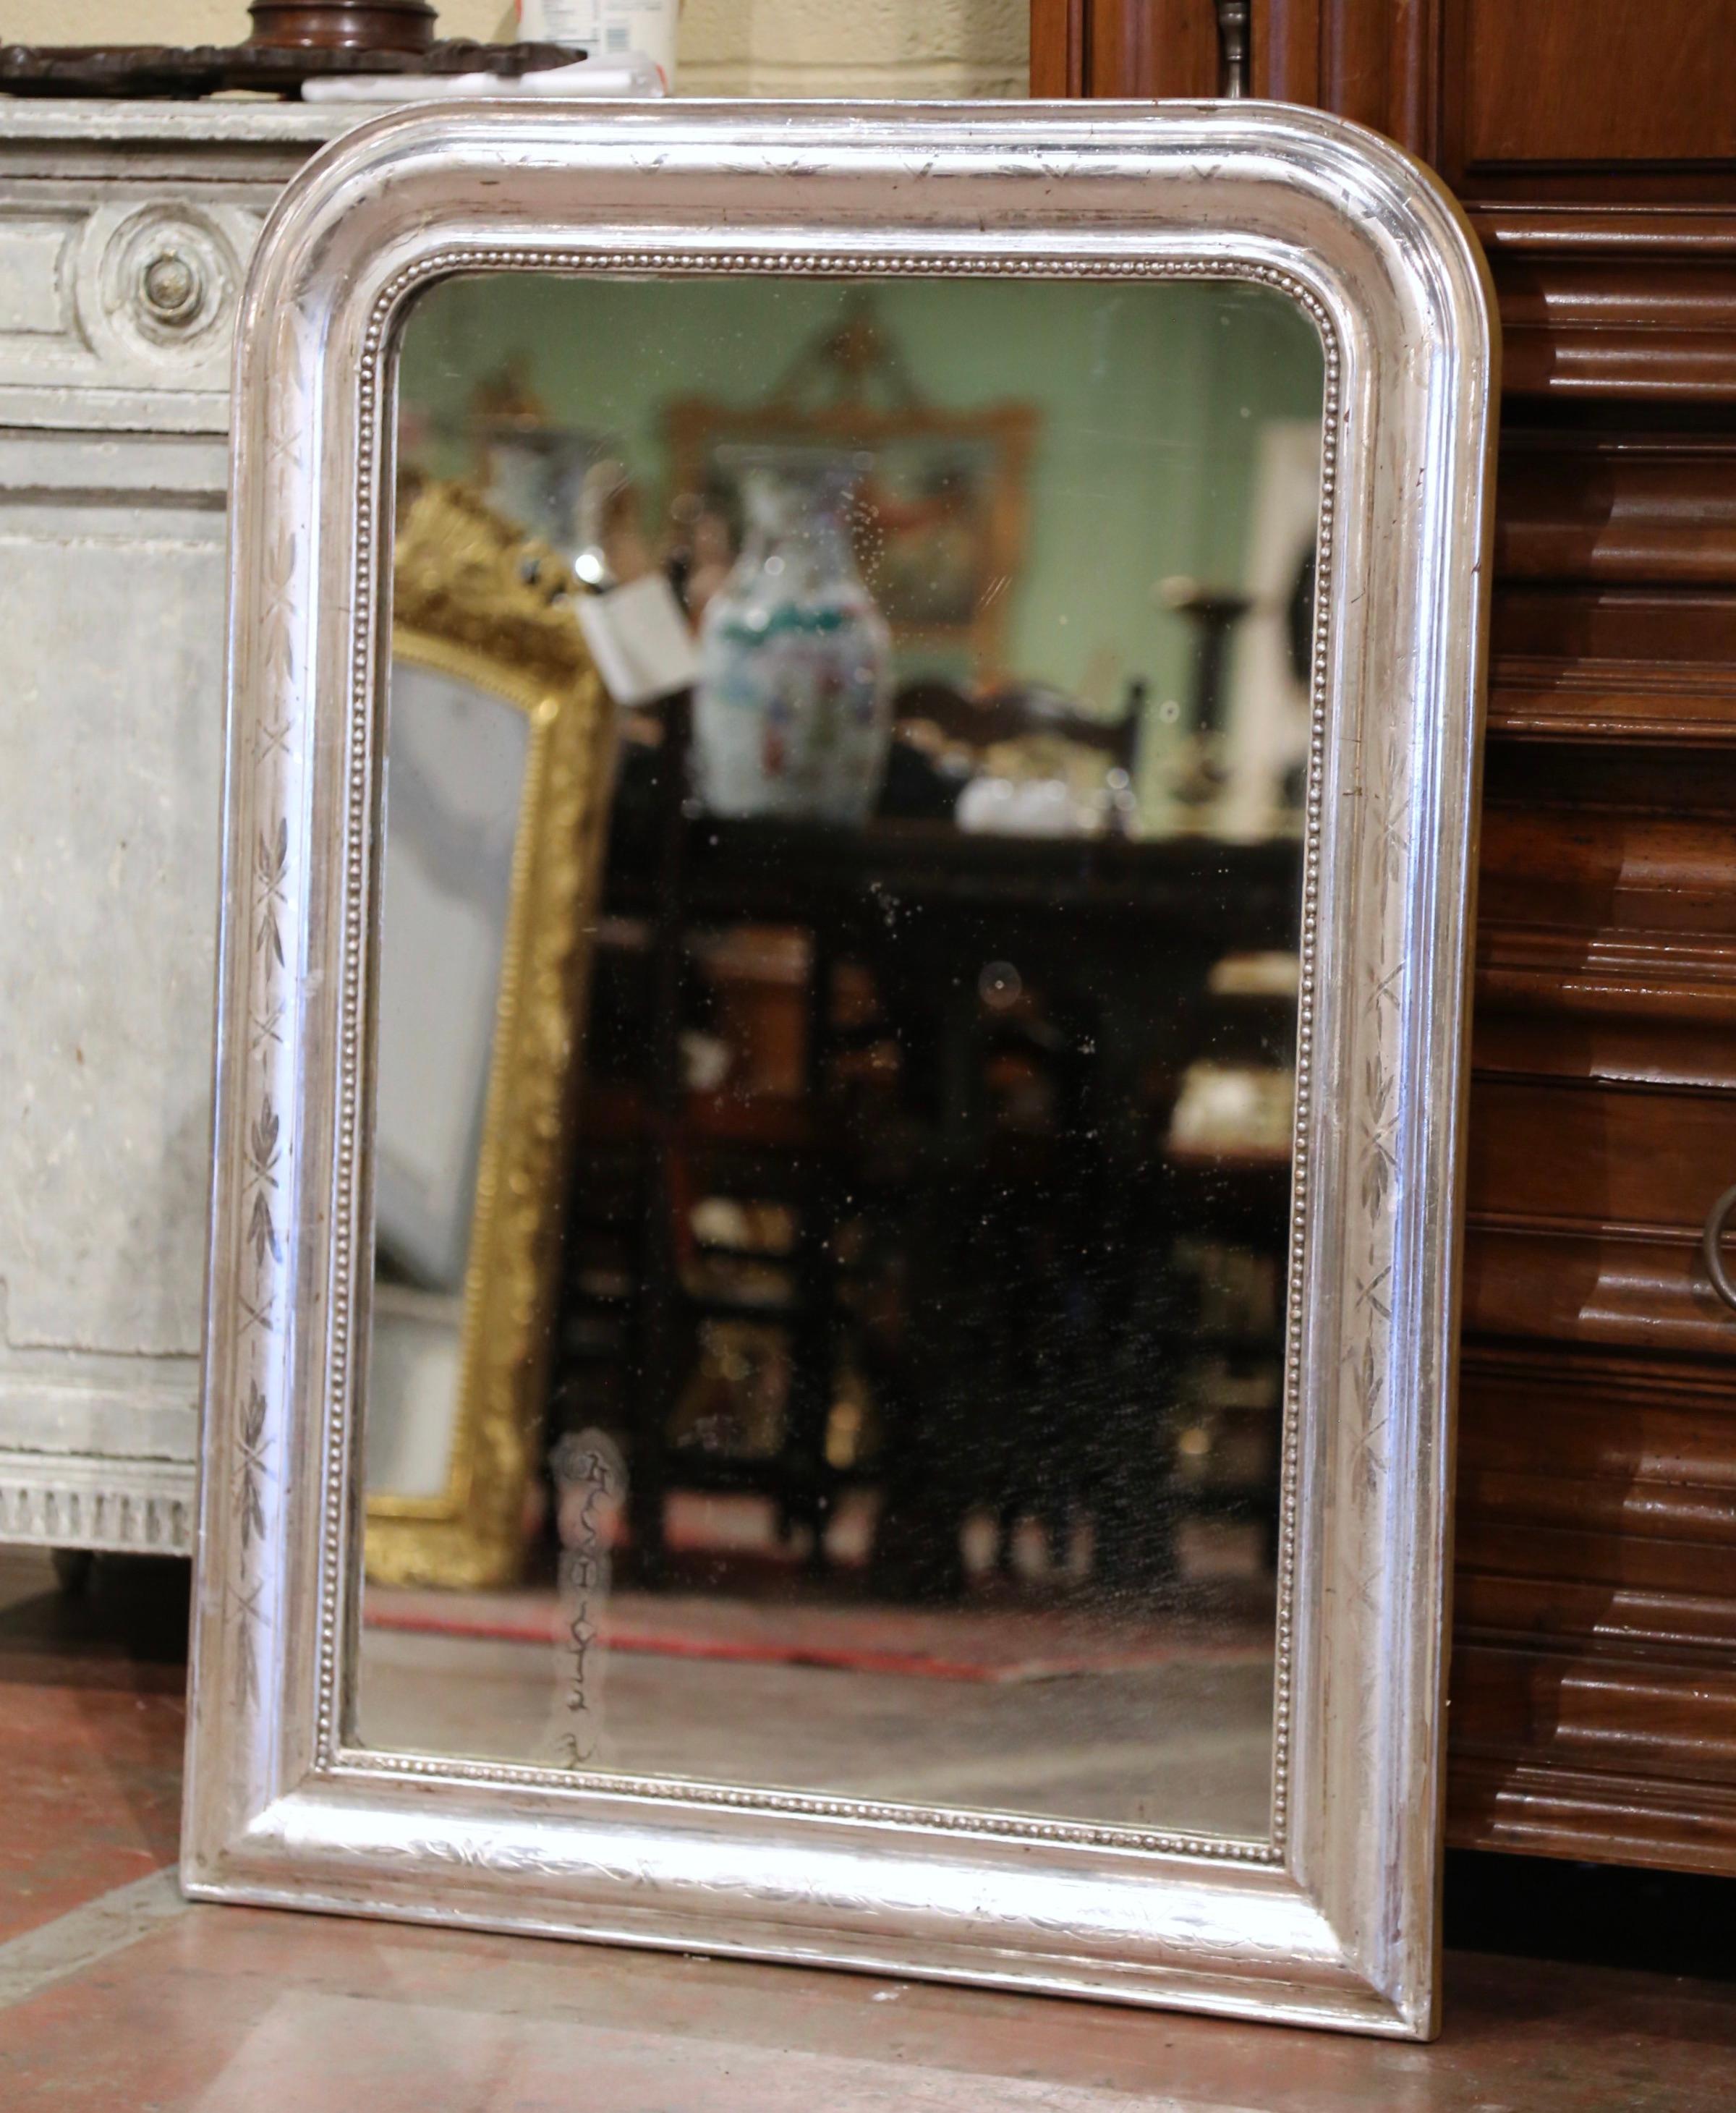 Crafted in the Burgundy region of France, circa 1870, the elegant antique mirror has traditional, timeless lines with rounded corners. The rectangular frame is decorated with a luxurious silver leaf finish over discrete engraved floral and geometric